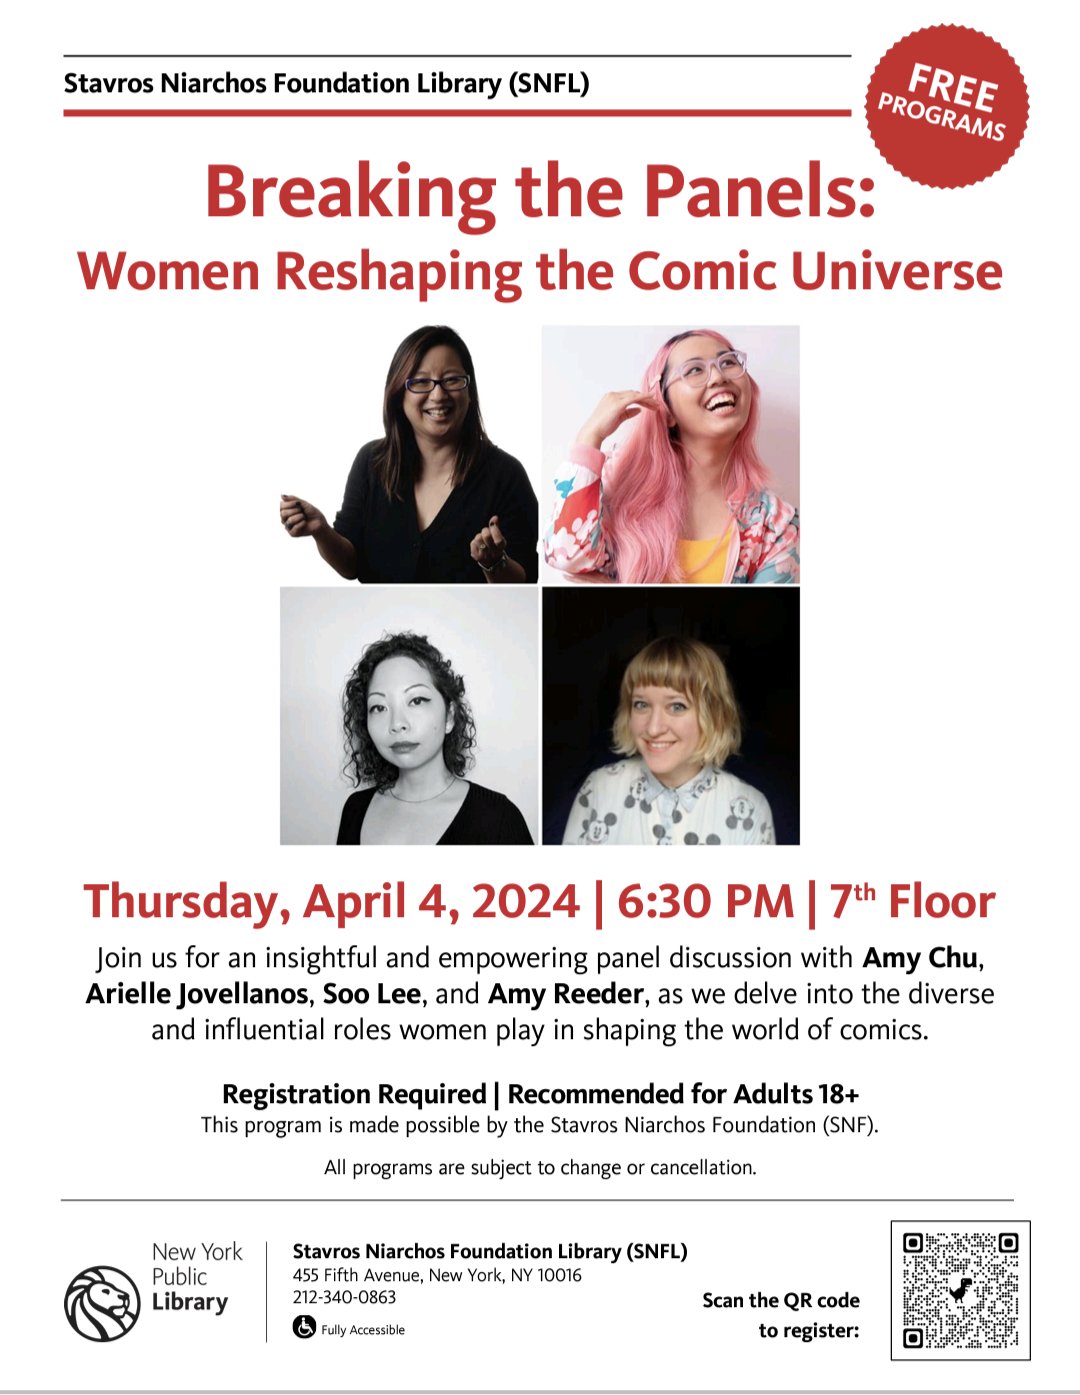 Promotional flyer for the "breaking the panels: women reshaping the comic universe" panel discussion event at stavros niarchos foundation library.